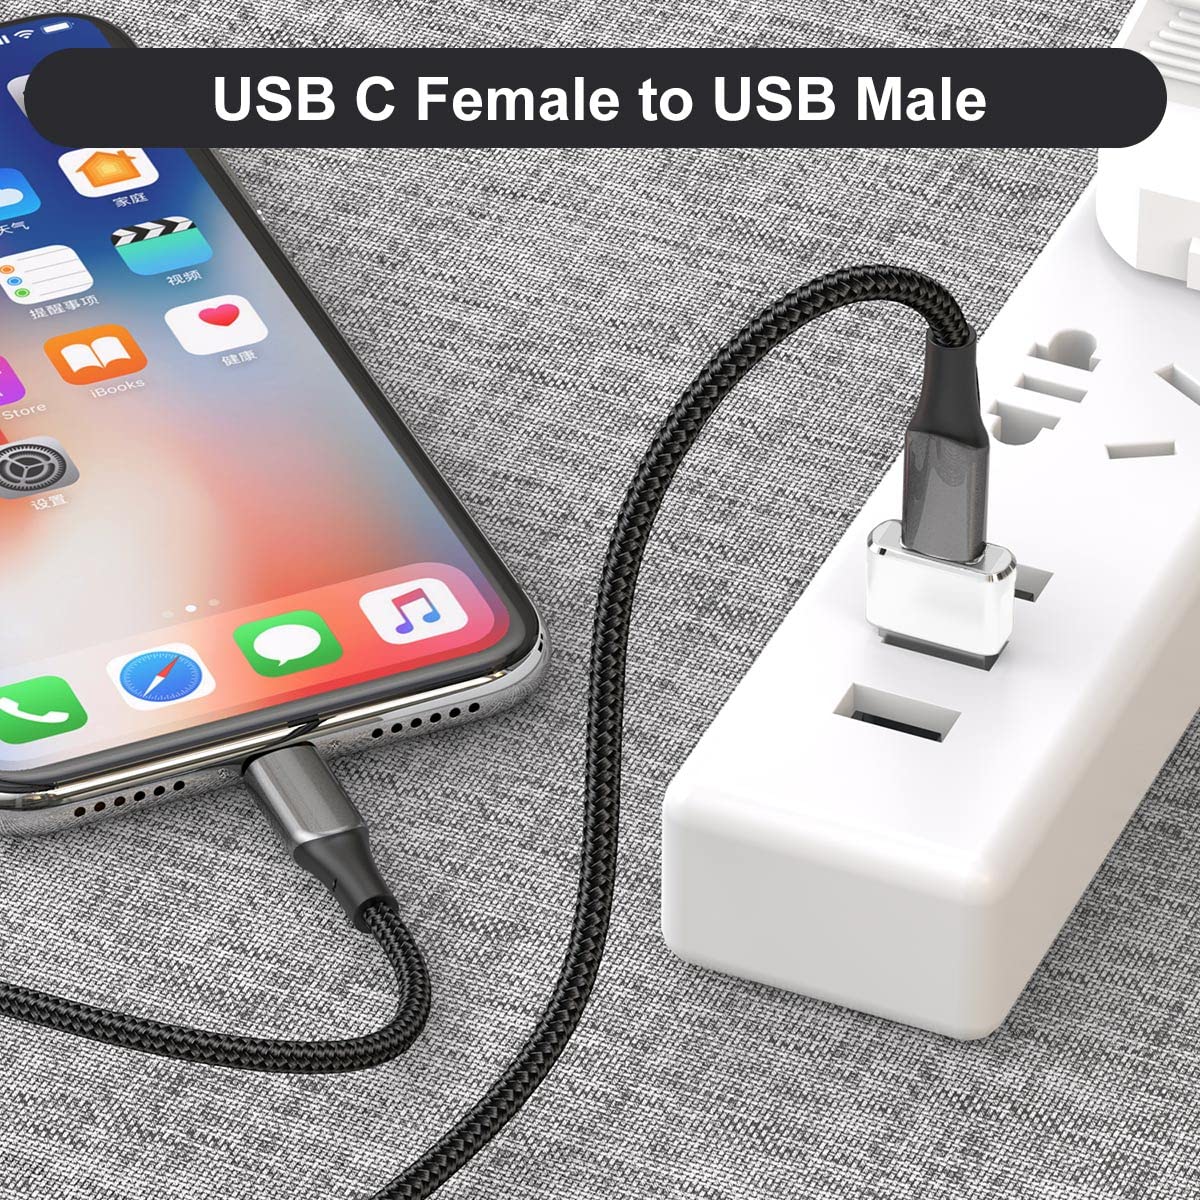 Basesailor USB to USB C Adapter 2 Pack,Type C Female to A Male Cable Converter for Apple Watch Ultra iWatch Series 7 8,iPhone 14 13 12 11 Pro Max Mini,AirPods,iPad 9 Air 4 5,Samsung Galaxy S20 S21 S22